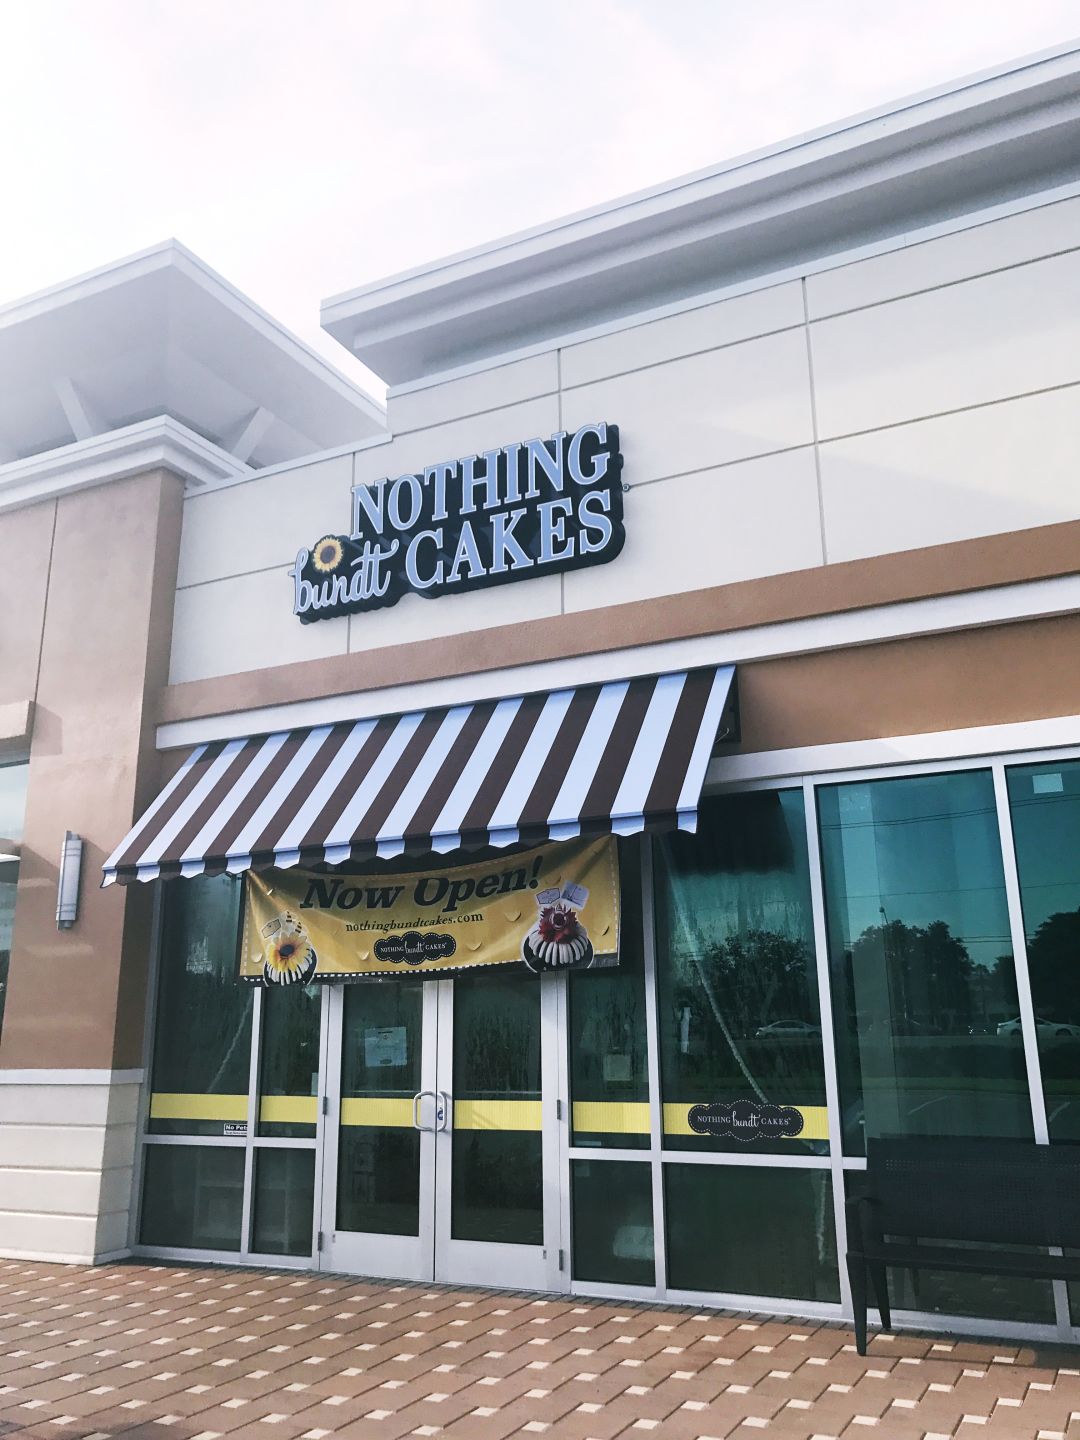 New Pics Of Nothing Bundt Cakes Stores